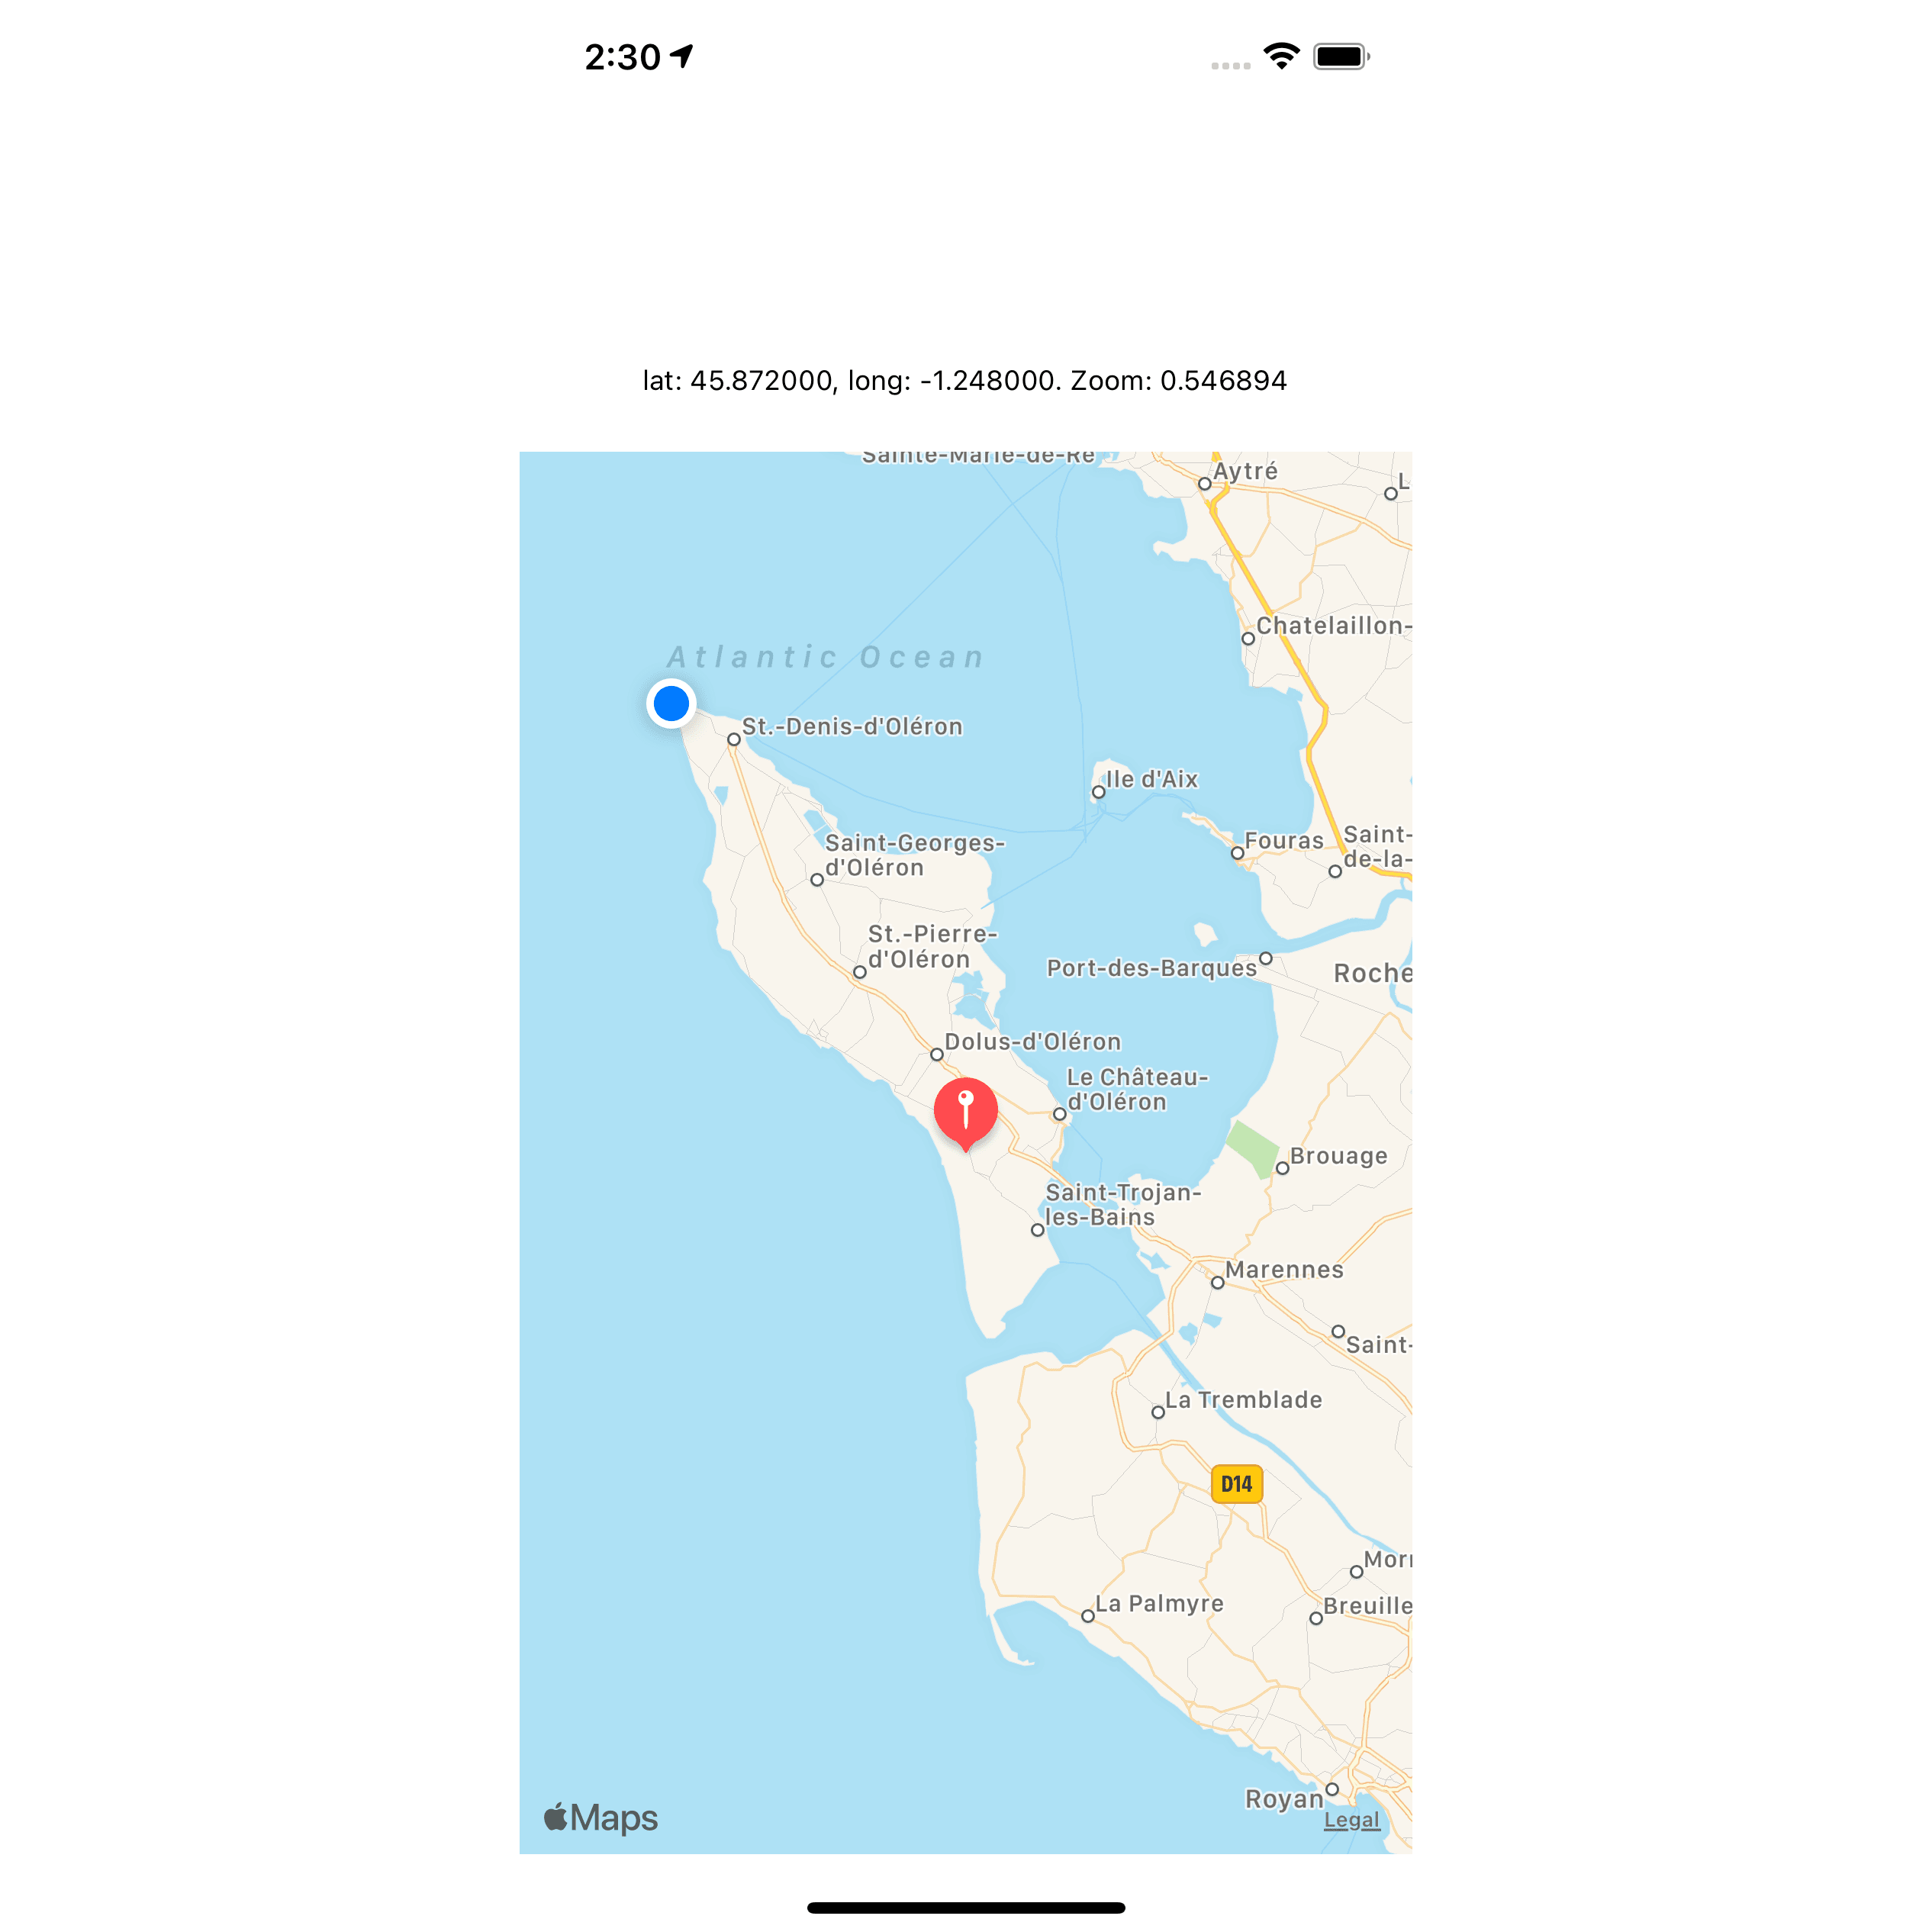 Embedded Apple Map showing a red pin